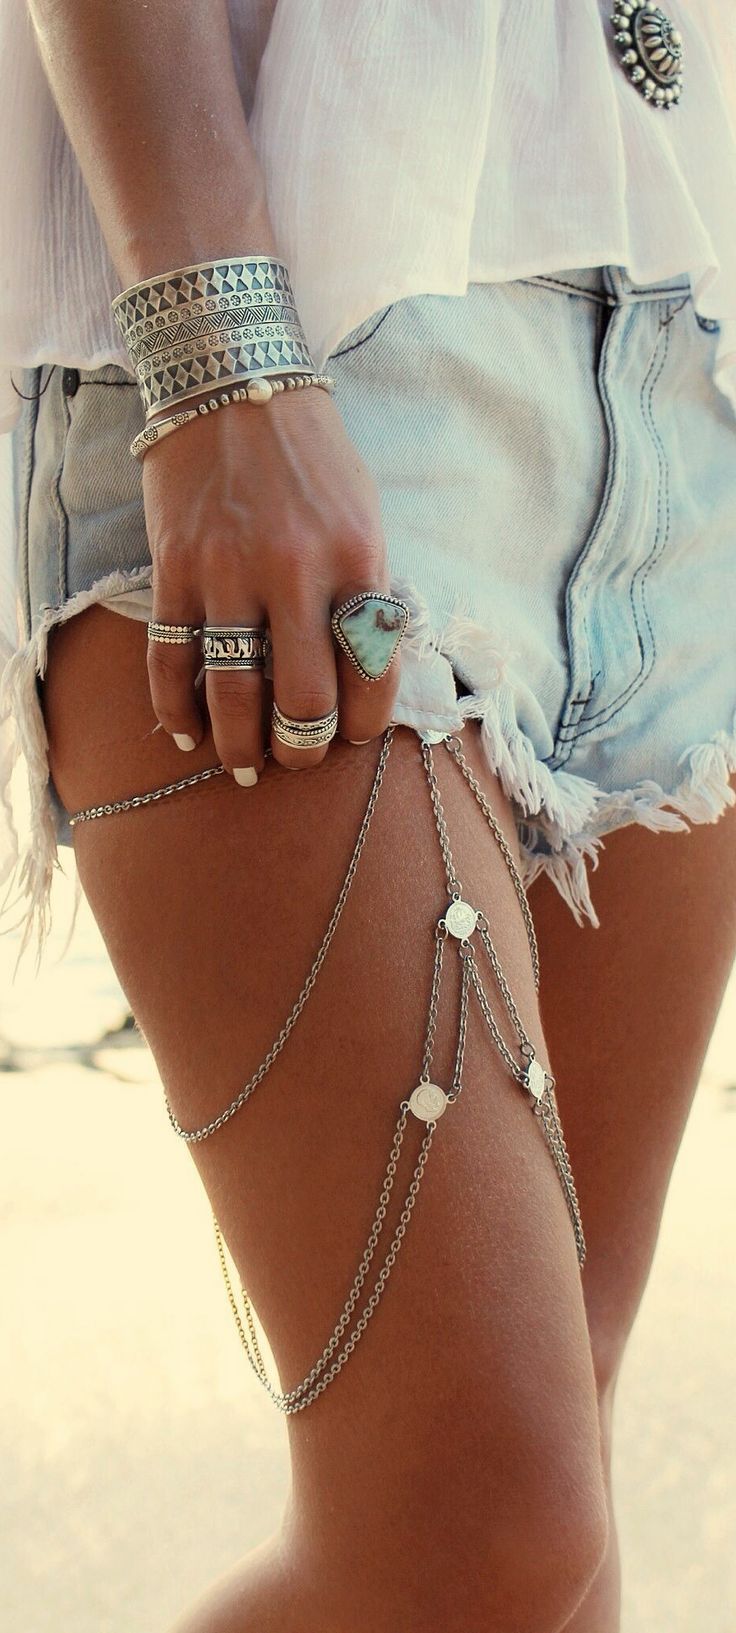 Oh, I like this, too. Thigh chain jewelry, easy to reproduce as handmade. Shorts and chains.